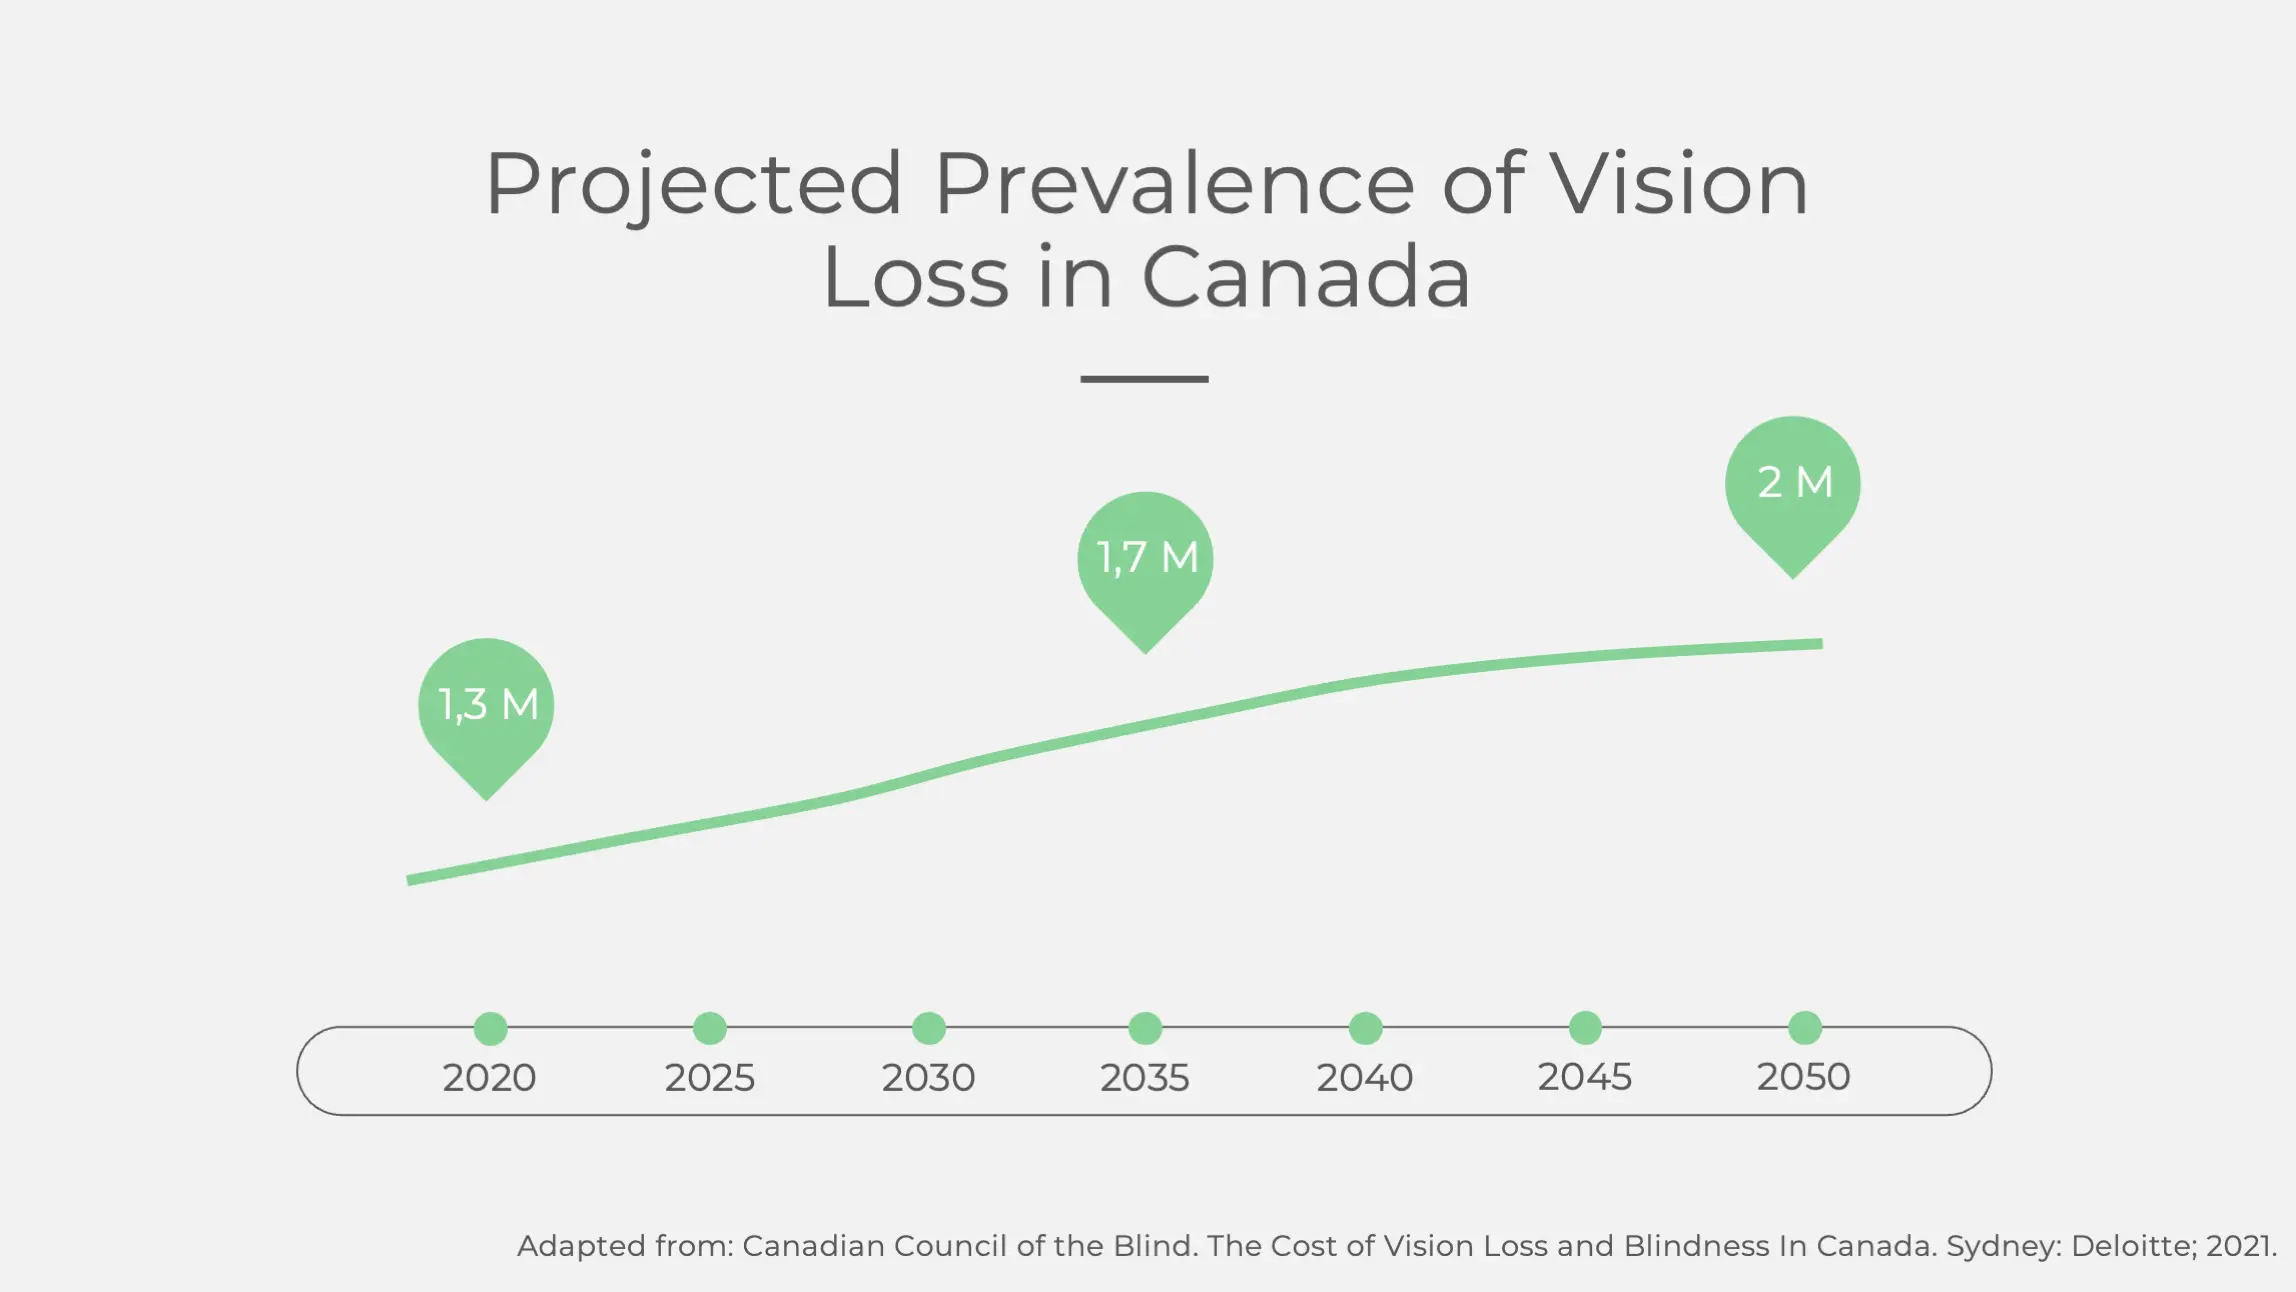 Projected Prevalence of Vision Loss in Canada